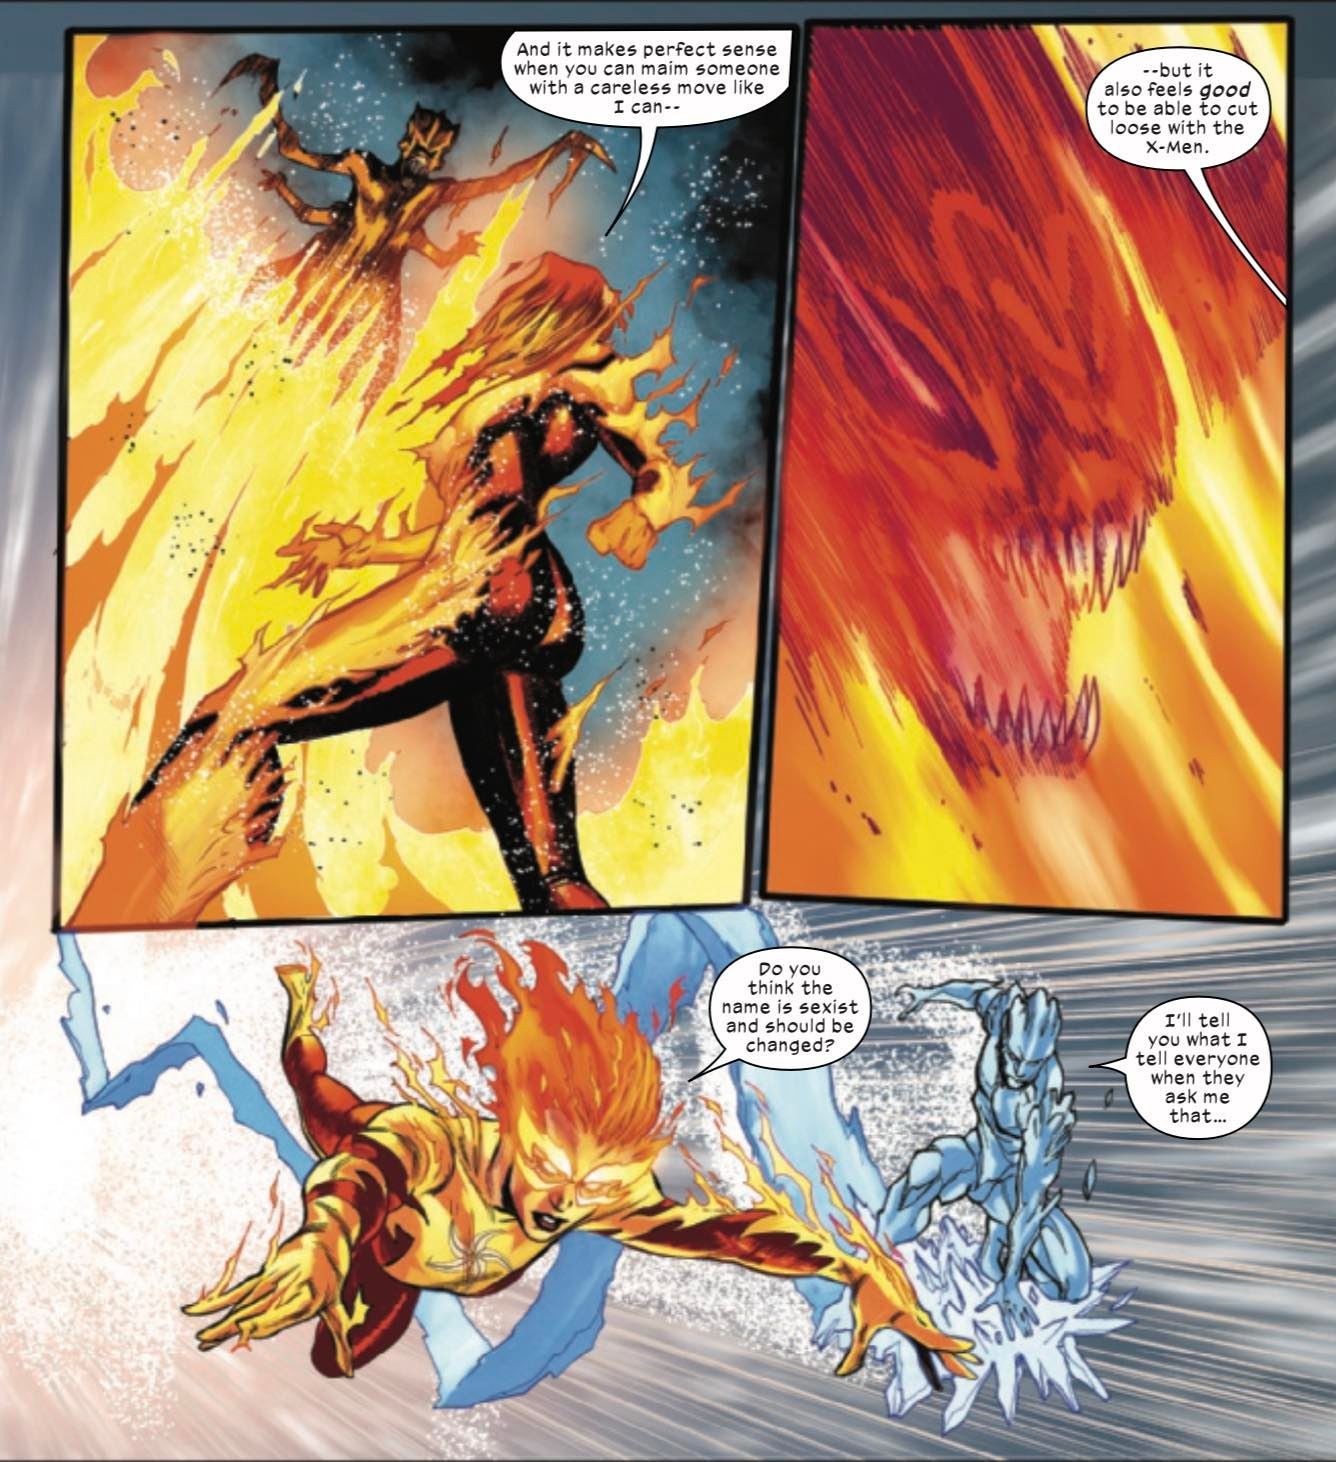 Iceman and Firestar discuss the X-Men name